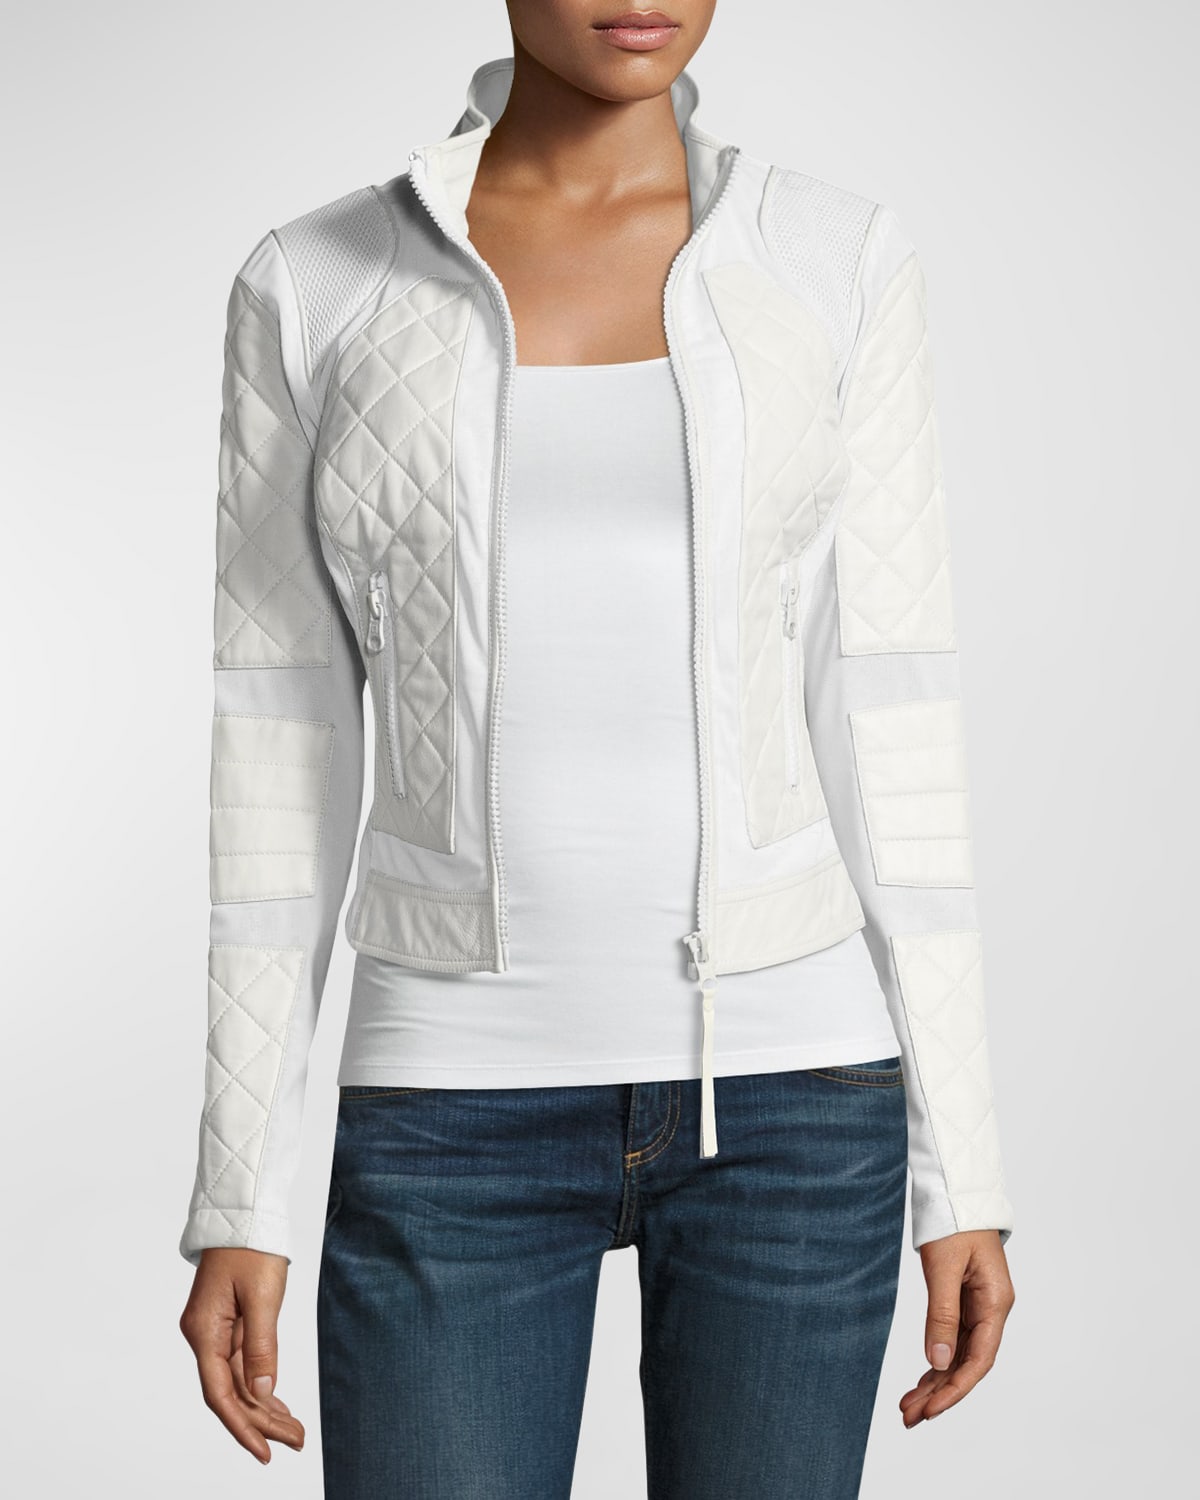 Blanc Noir Quilted Leather & Mesh Moto Jacket